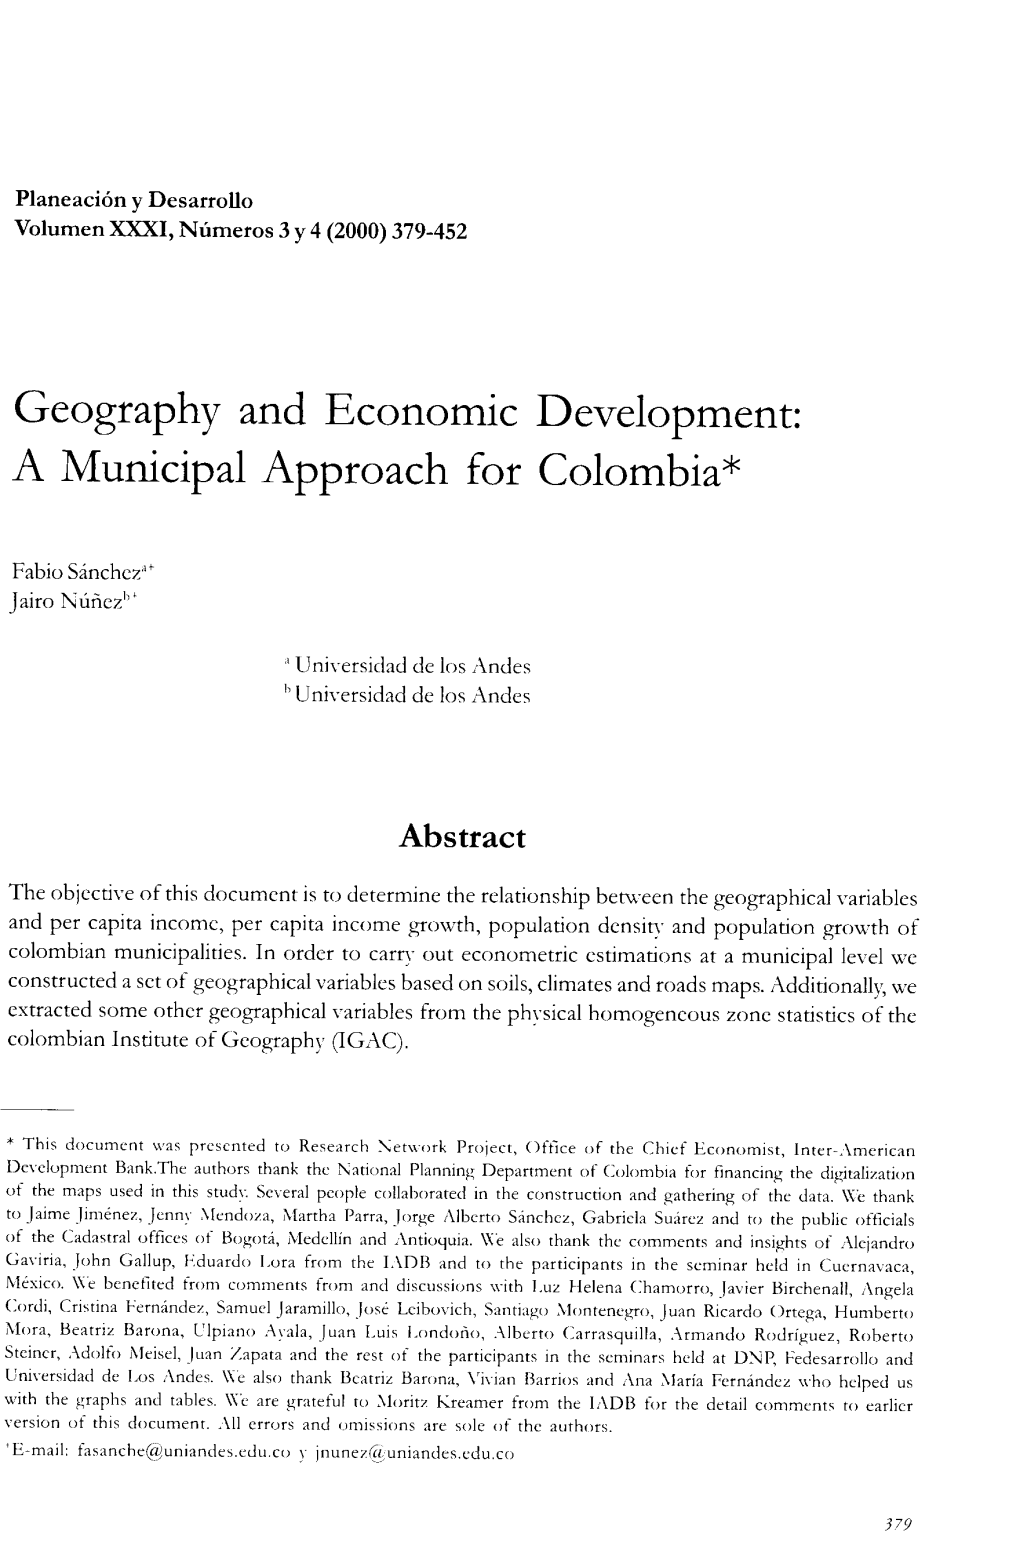 A Municipal Approach for Colombia*